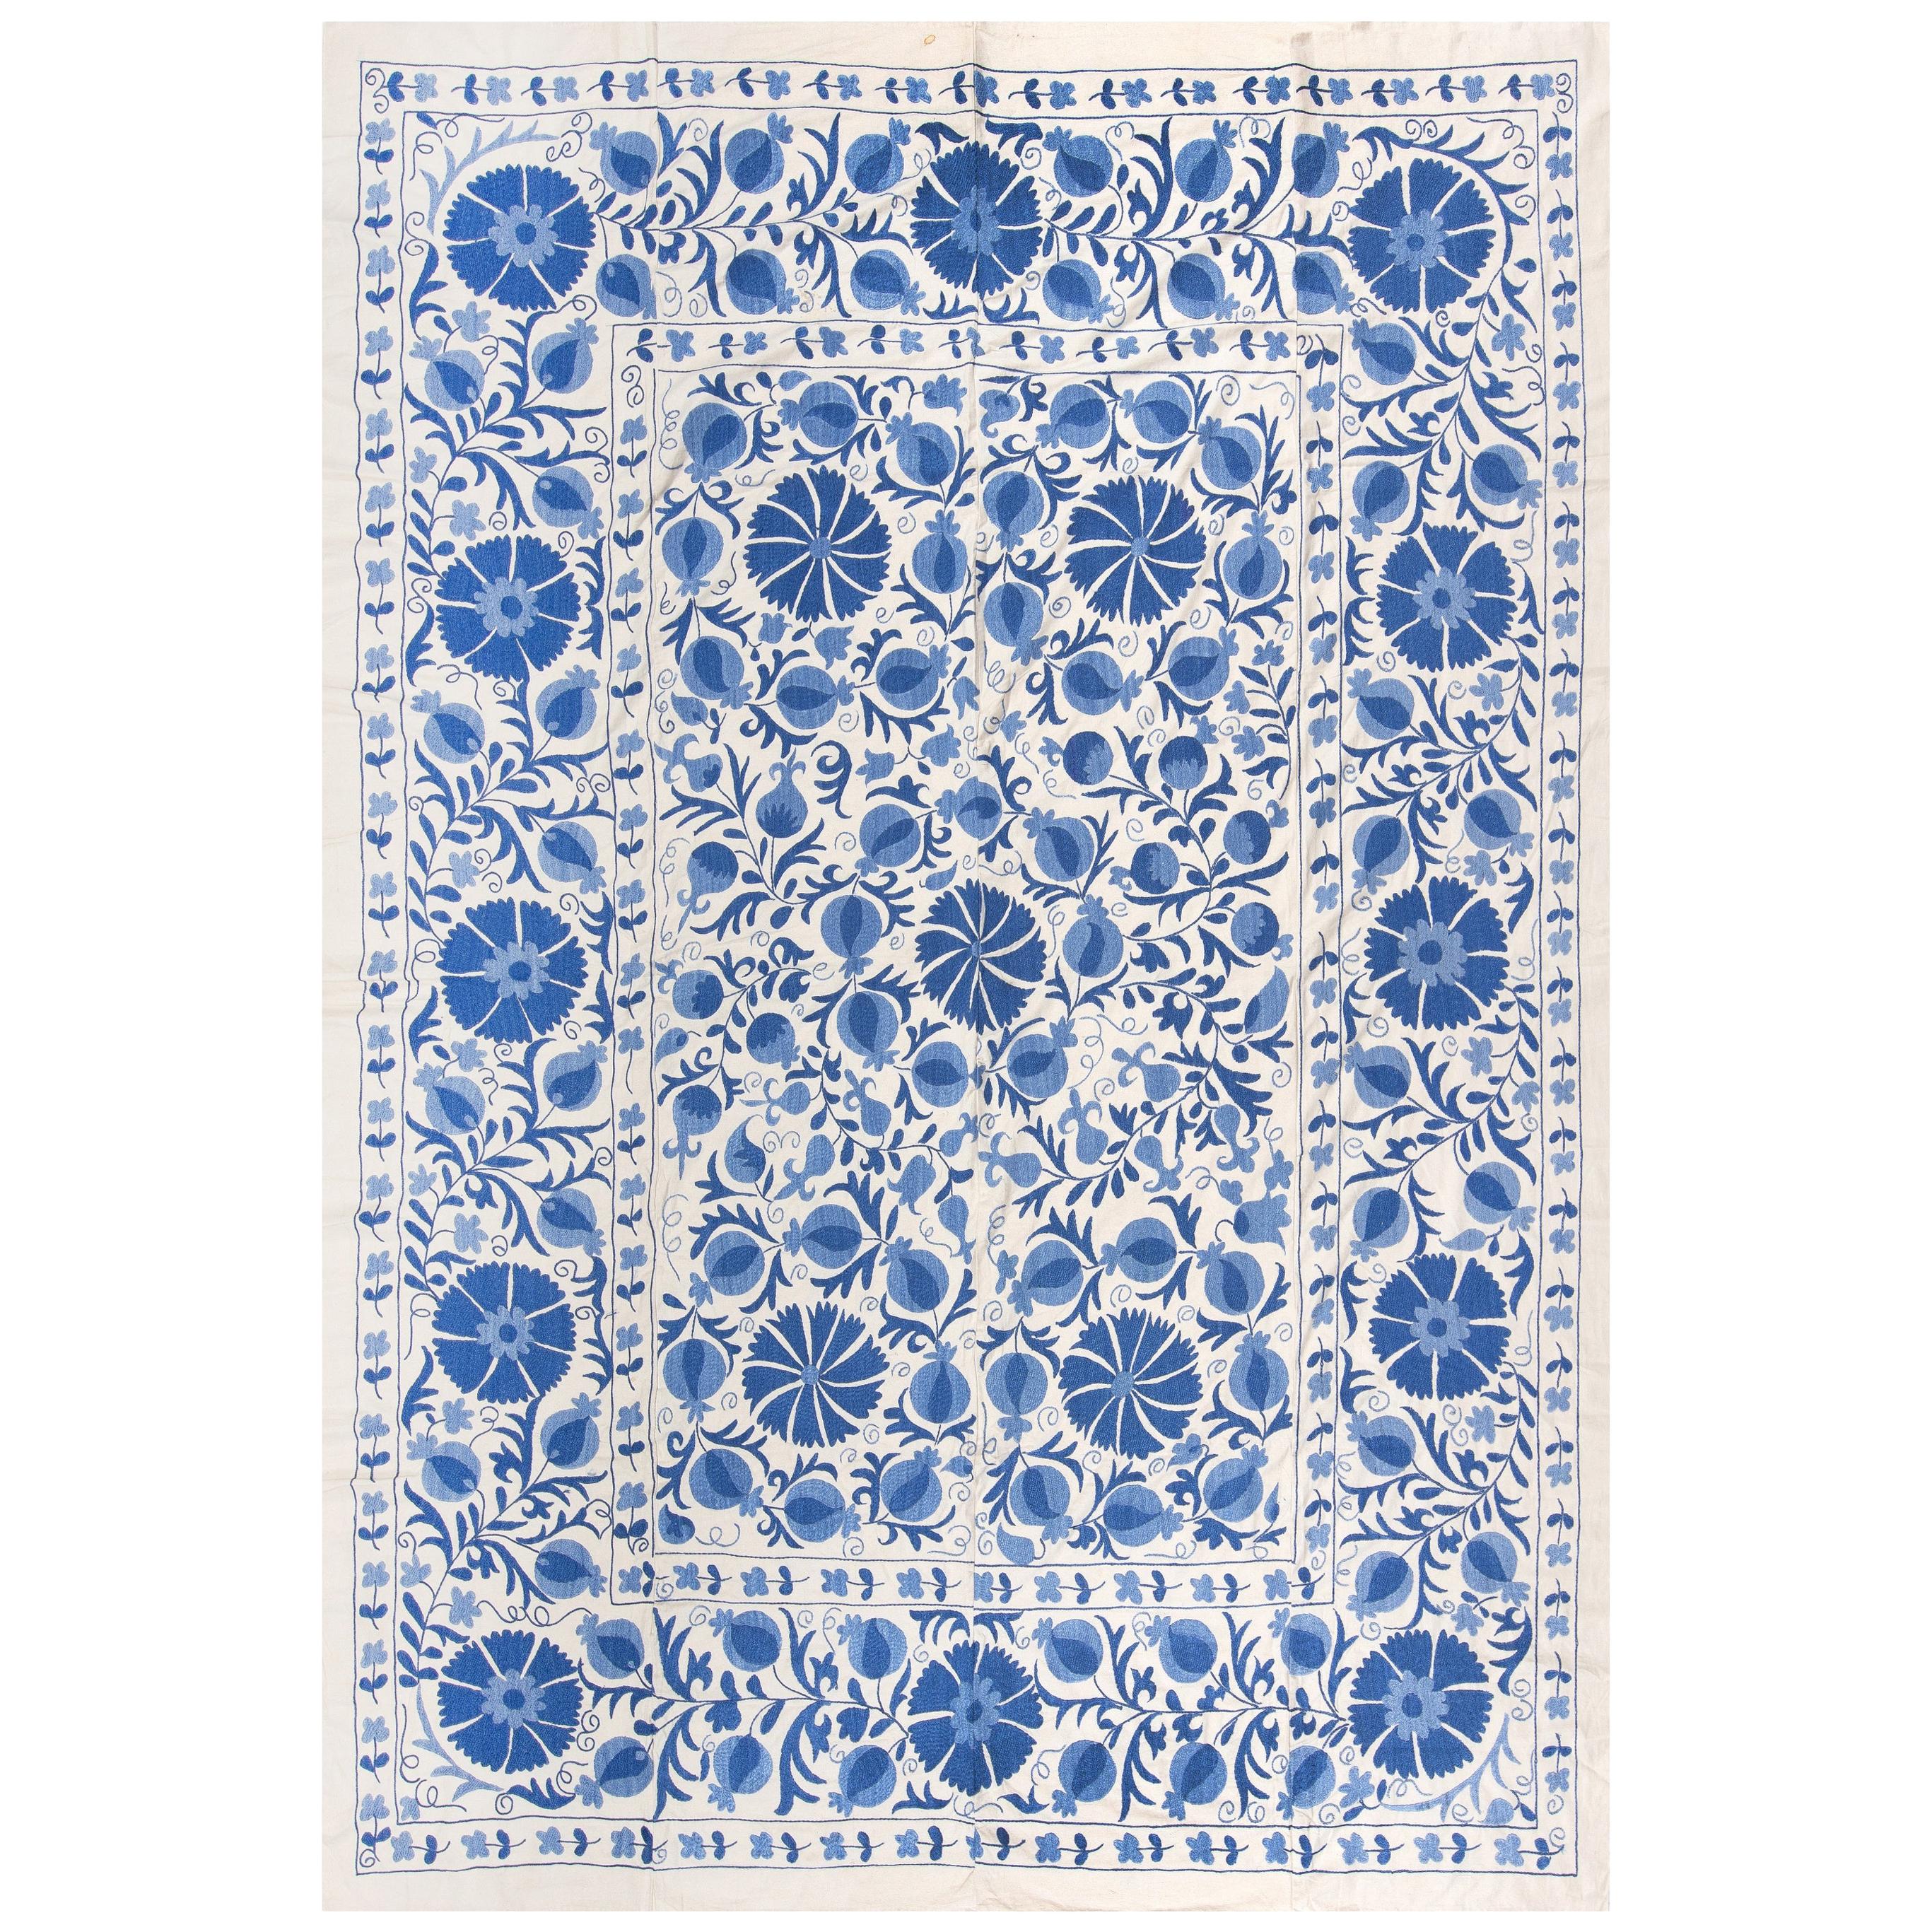 6.3x8.2 Ft Embroidered Wall Hanging in Cream & Blue, Handmade Suzani Bedspread For Sale